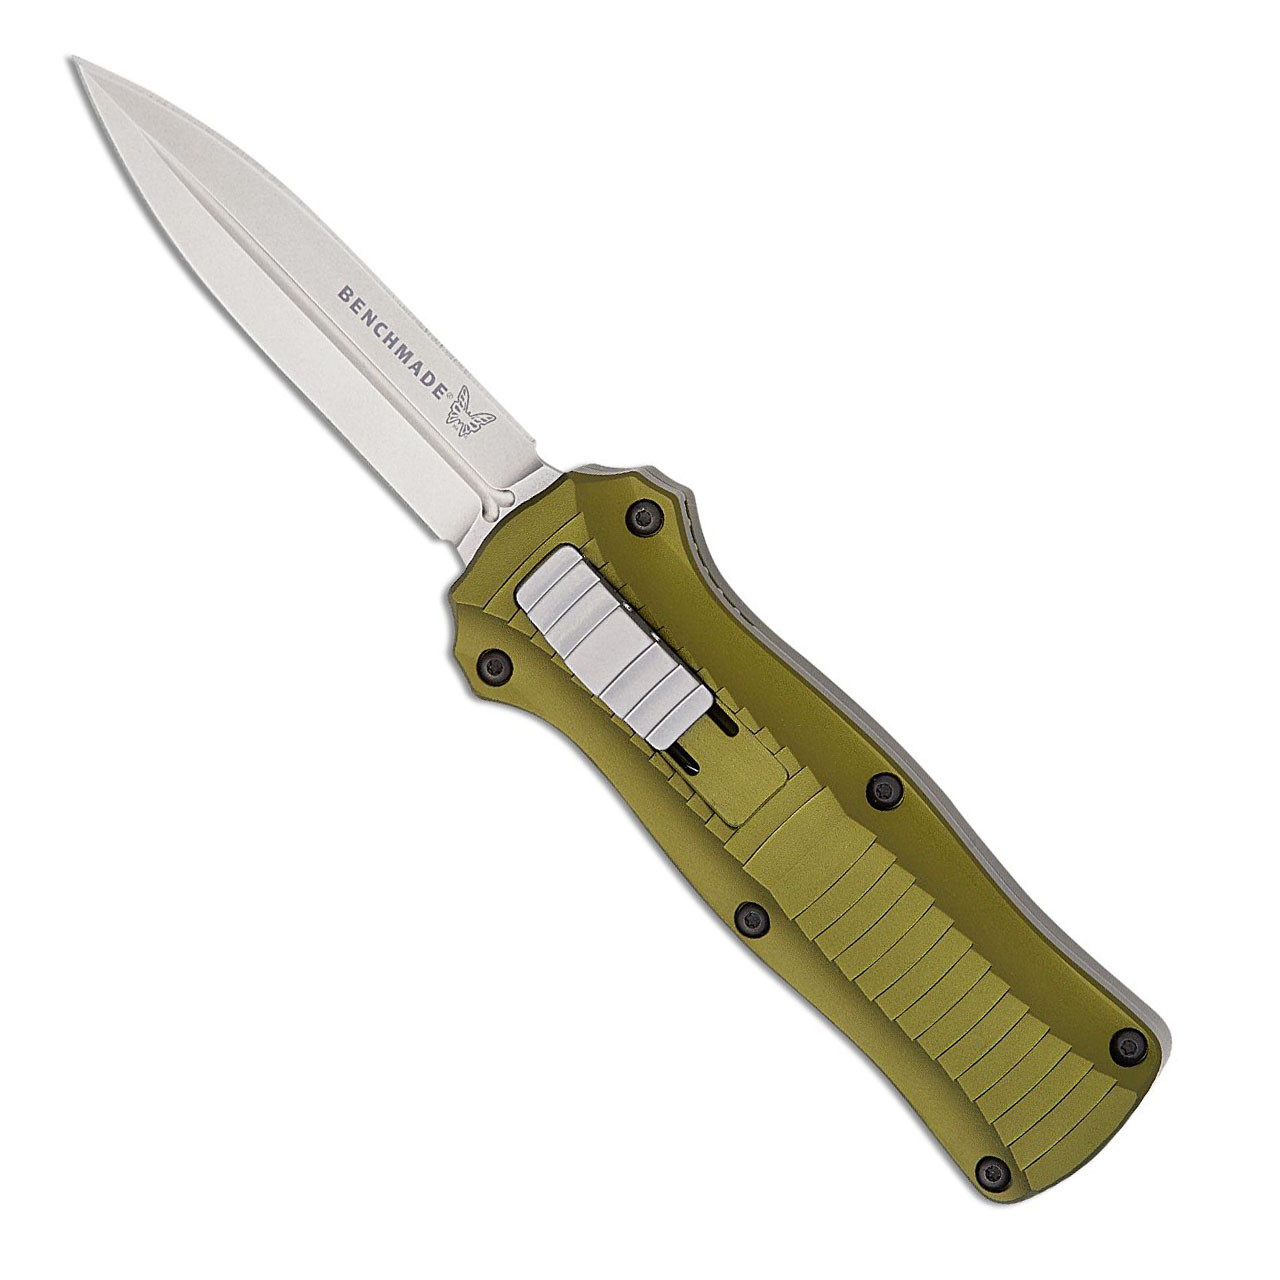 https://cdn11.bigcommerce.com/s-1tyihs272l/images/stencil/1280x1280/products/8871/20676/Benchmade-MiniInfidel-Auto-Green-Stonewashed-3350-2302__98626.1694092078.jpg?c=2